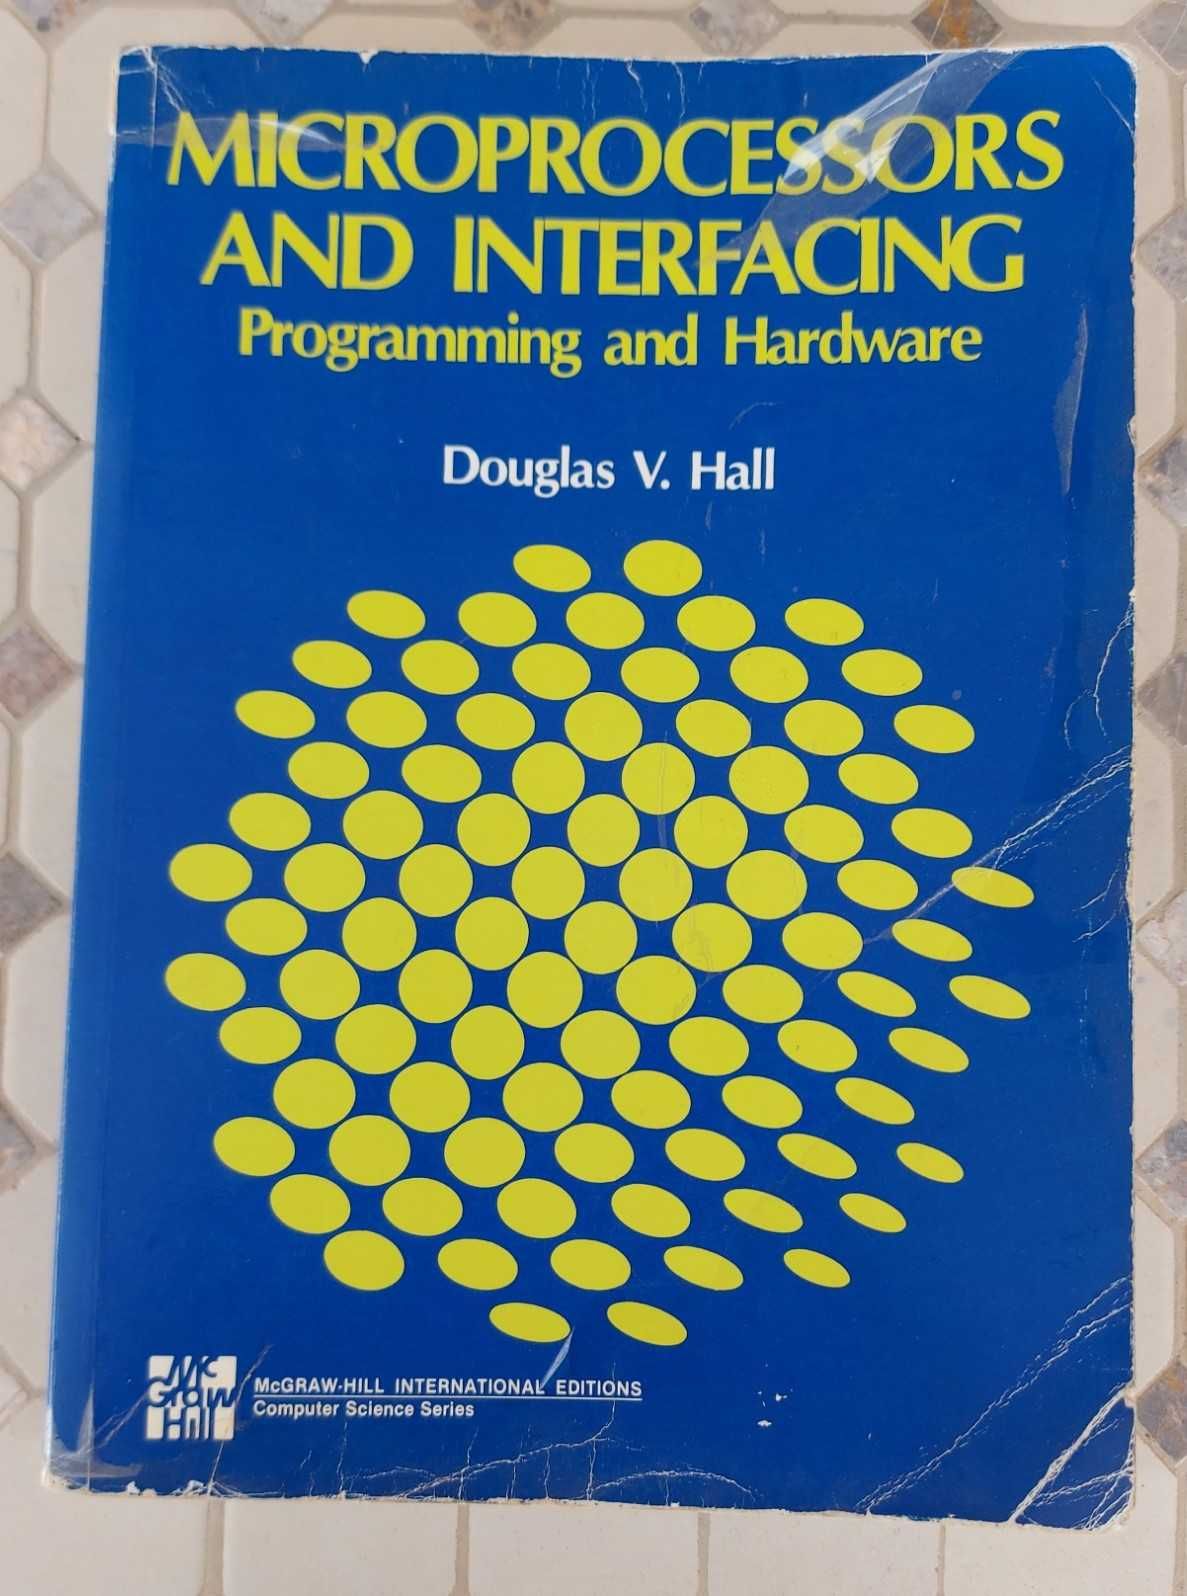 Microprocessors and Interfacing - Programming and Hardware